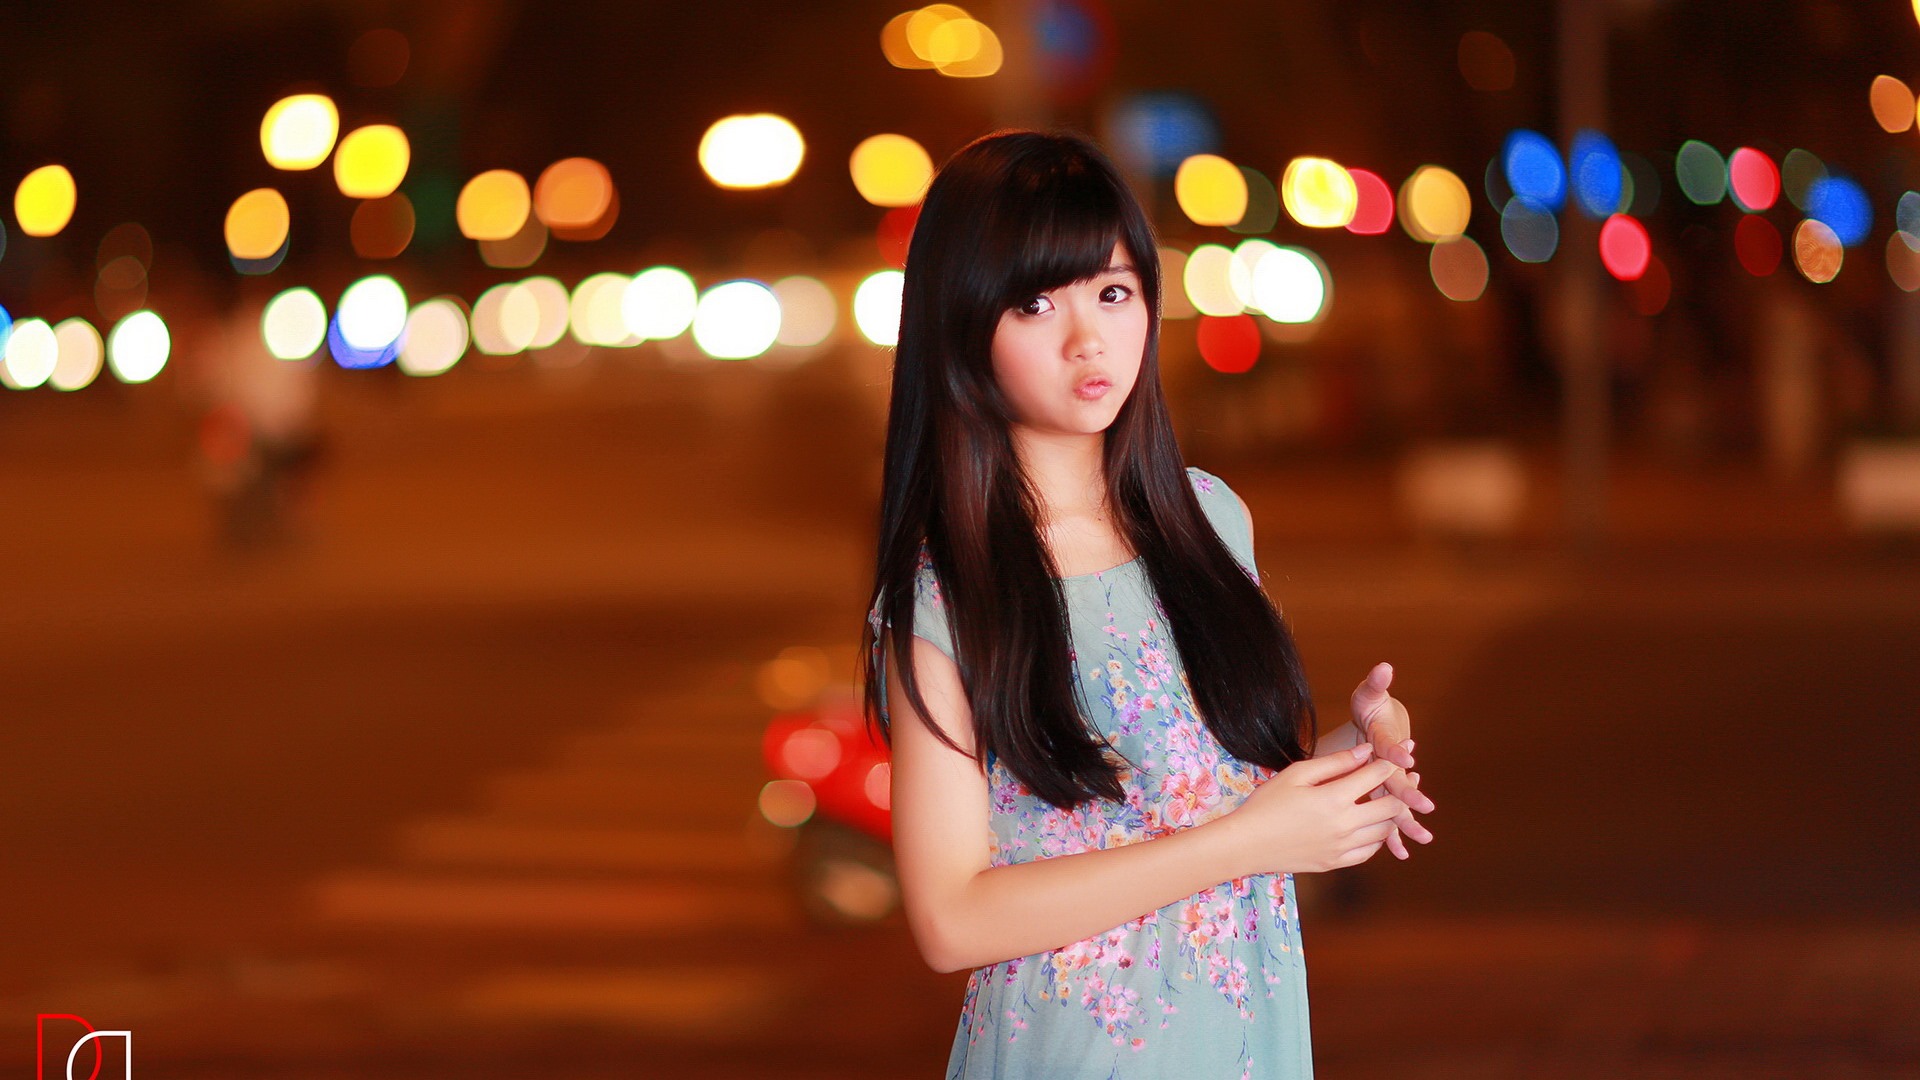 Pure and lovely young Asian girl HD wallpapers collection (3) #27 - 1920x1080